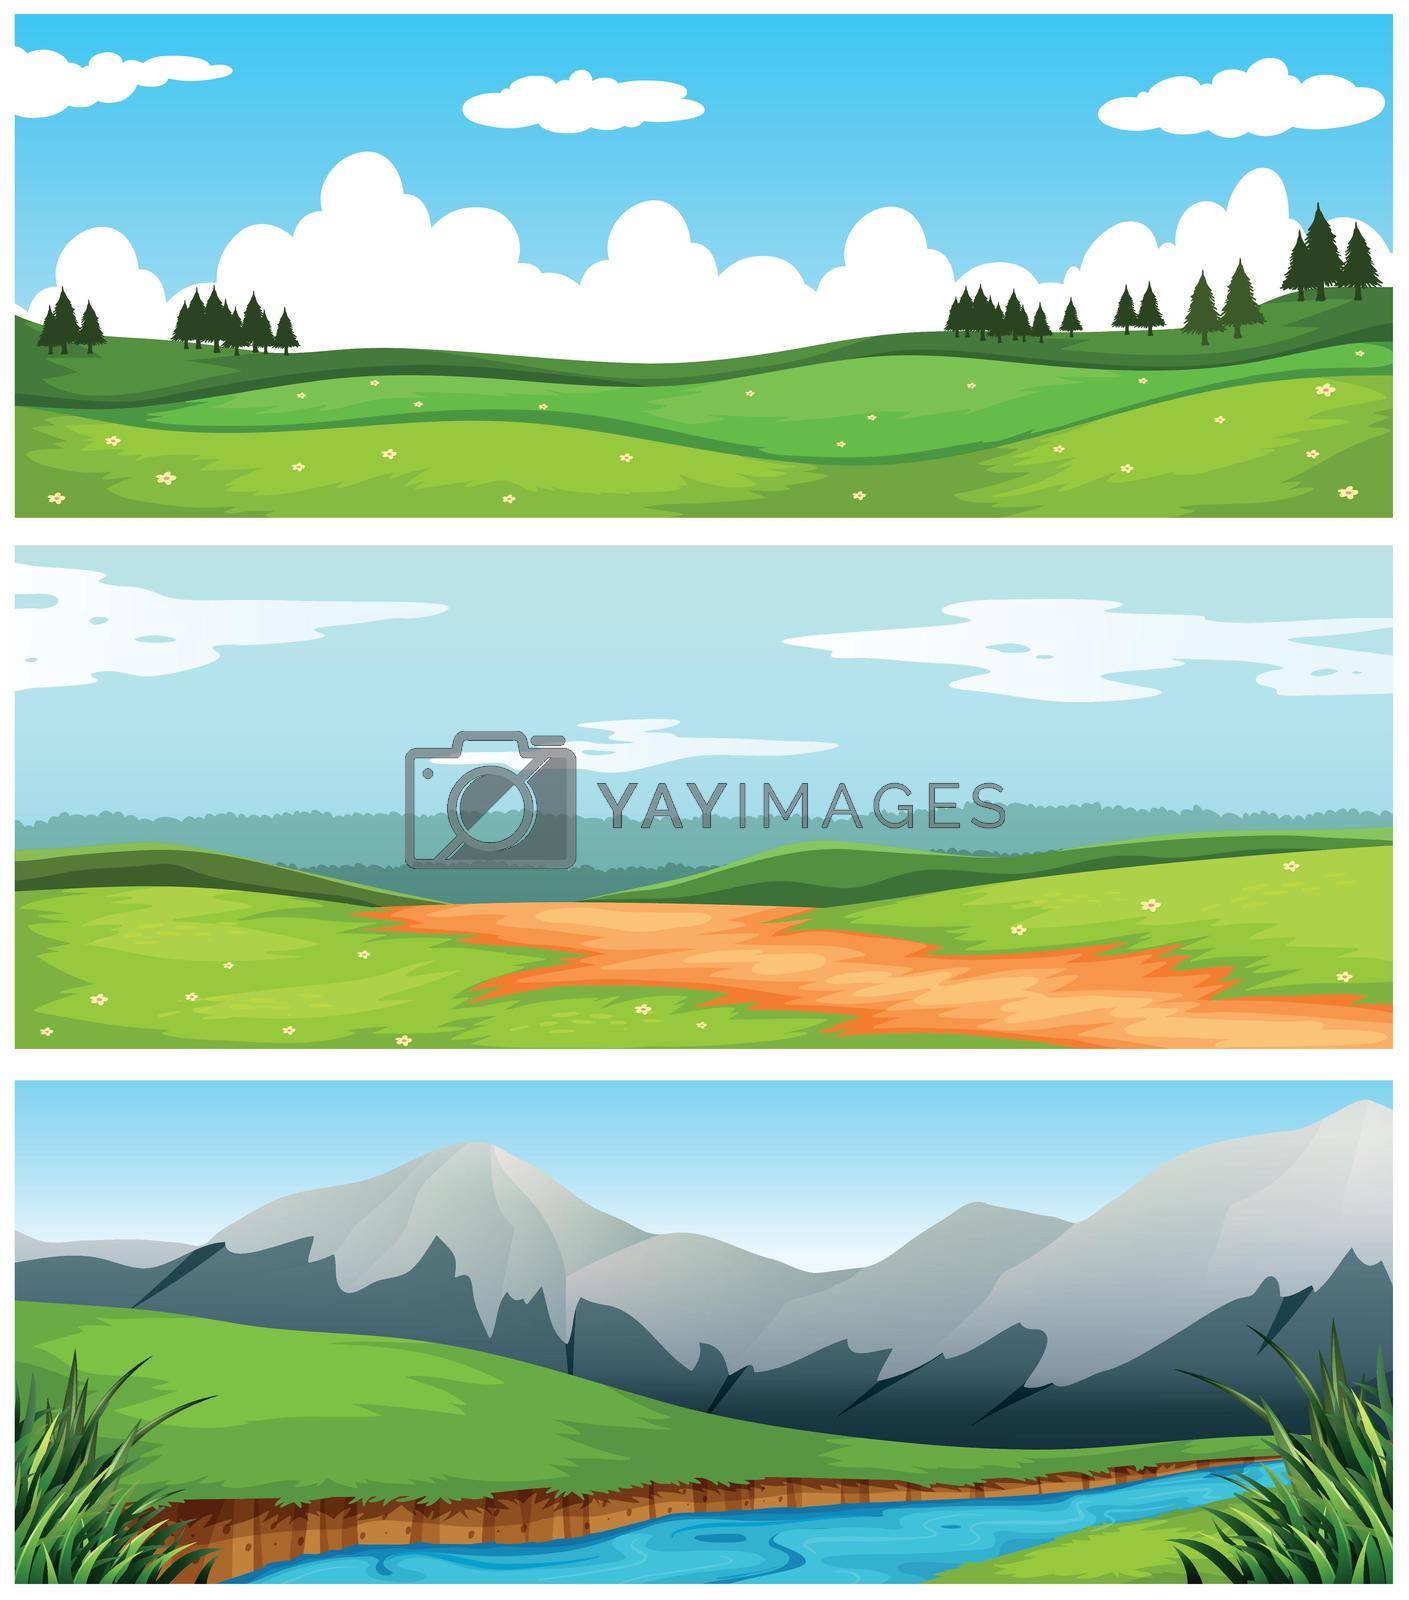 Scenes with field and road in countryside illustration